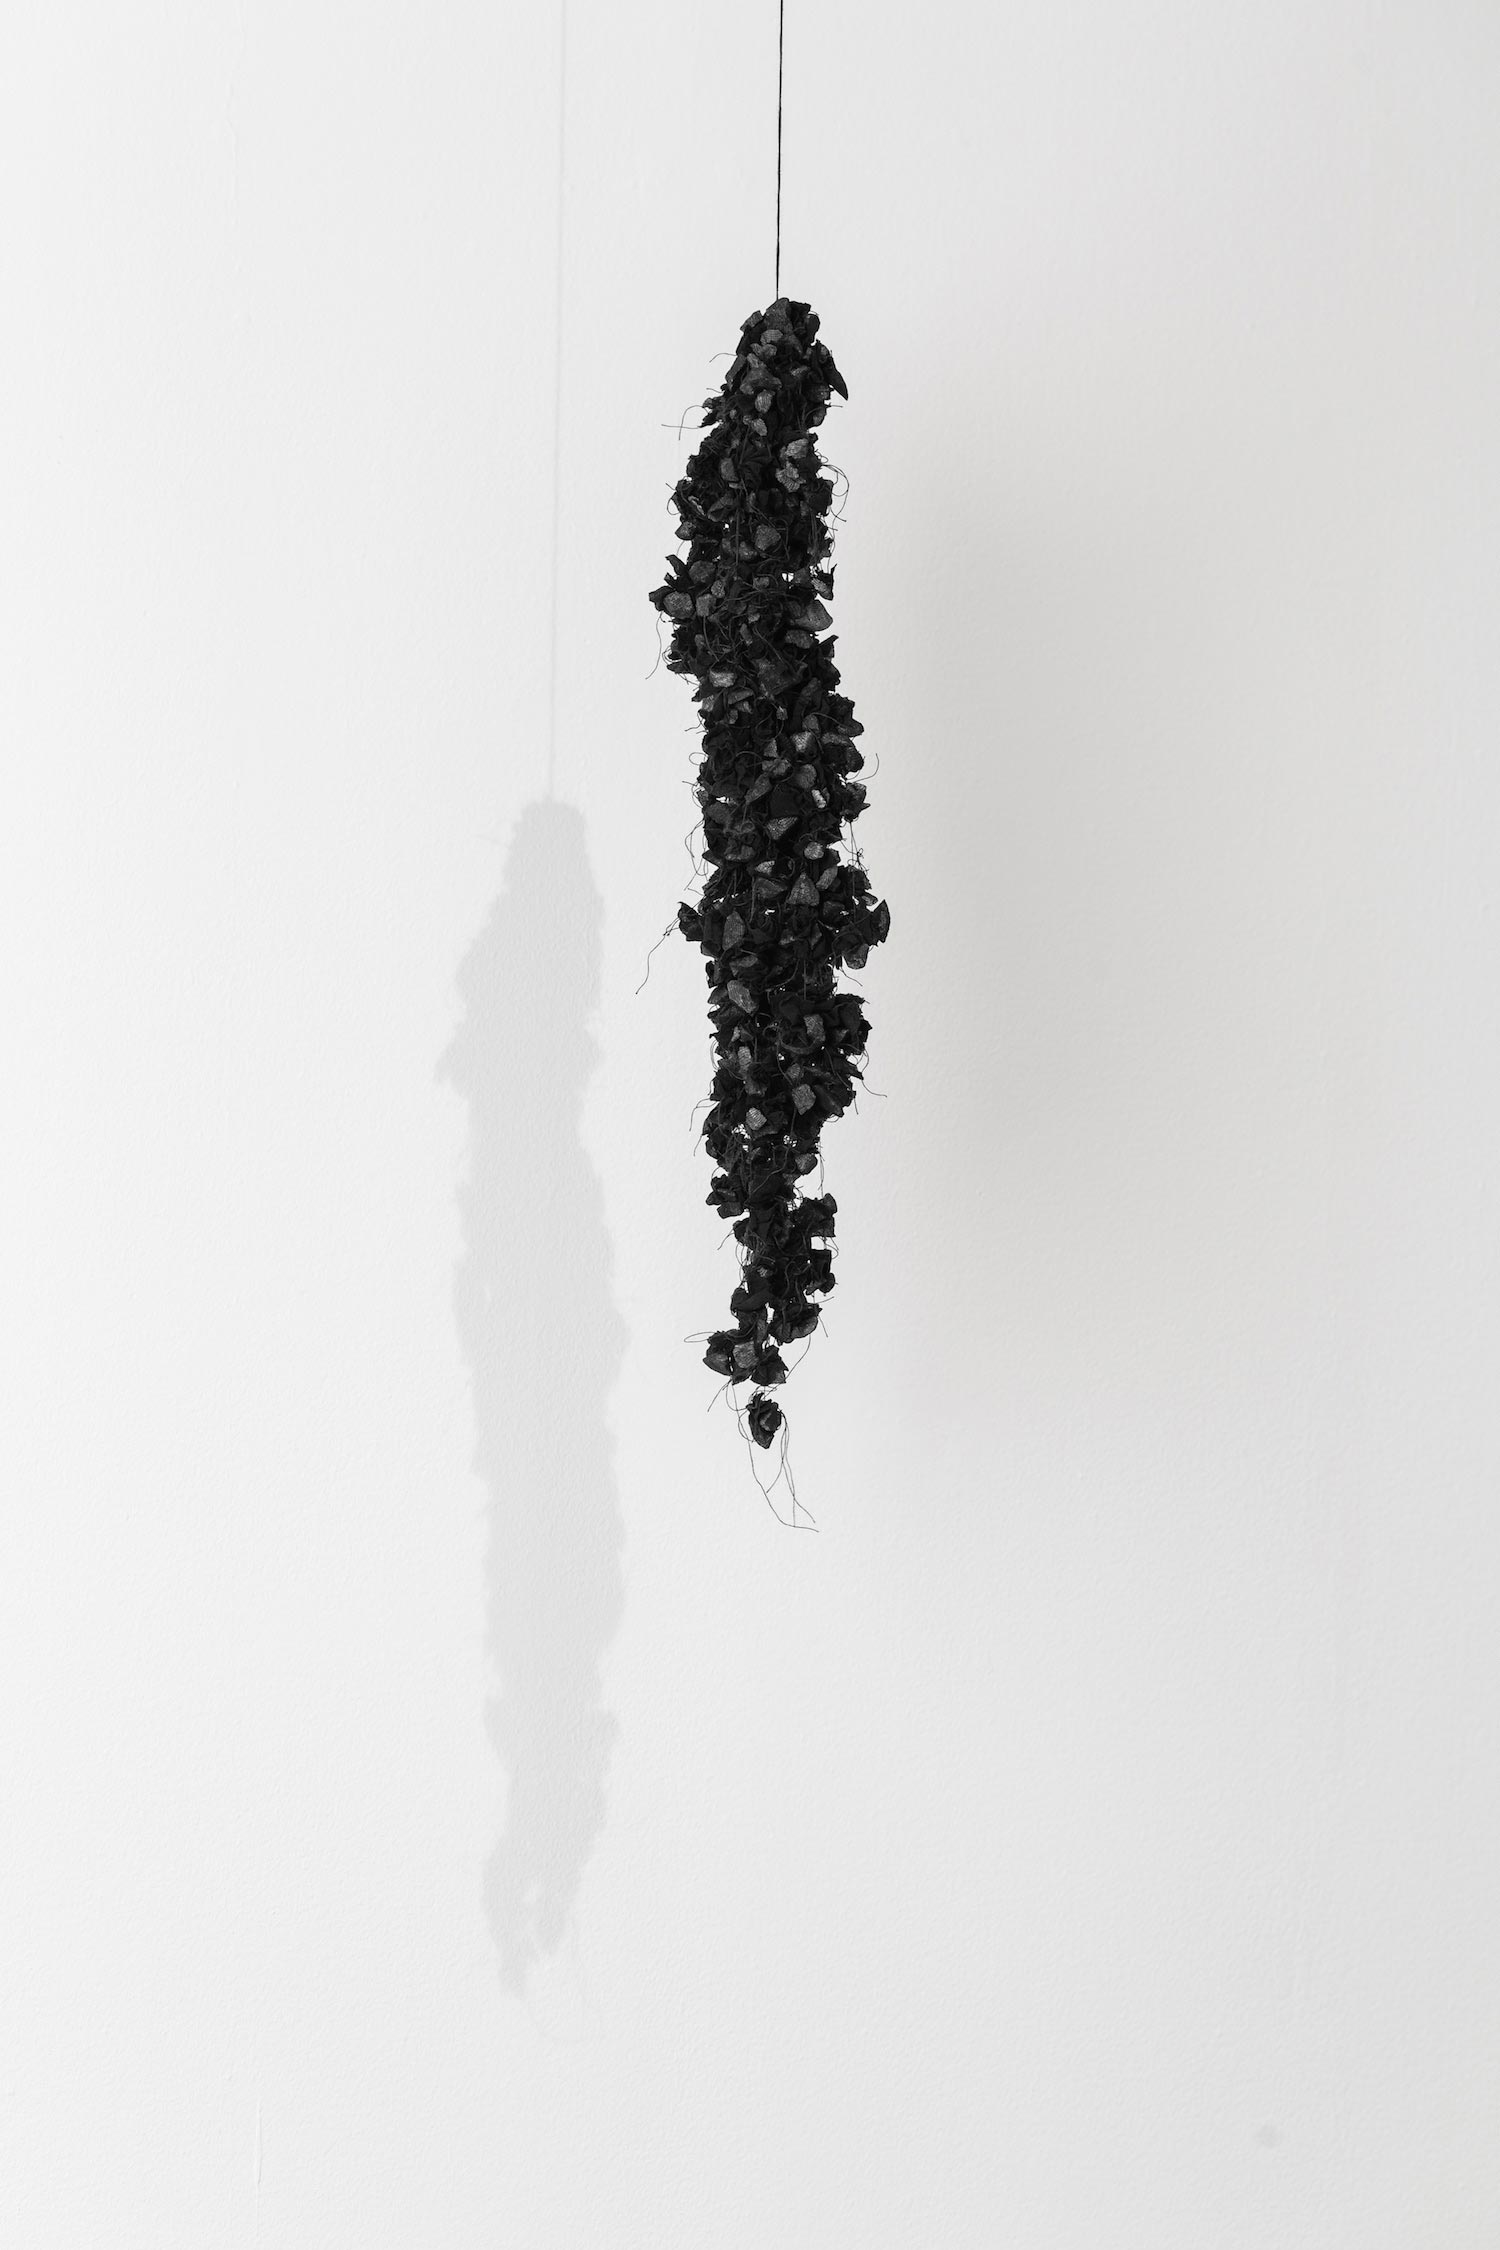 Sara Al Haddad, remembering(s), 521 days, fabric, stones and thread, dimensions variable. Installation in forget (,) to remember, Cuadro Fine Art Gallery, 2018, installation view in forget (,) to remember, Cuadro Fine Art Gallery, 2018